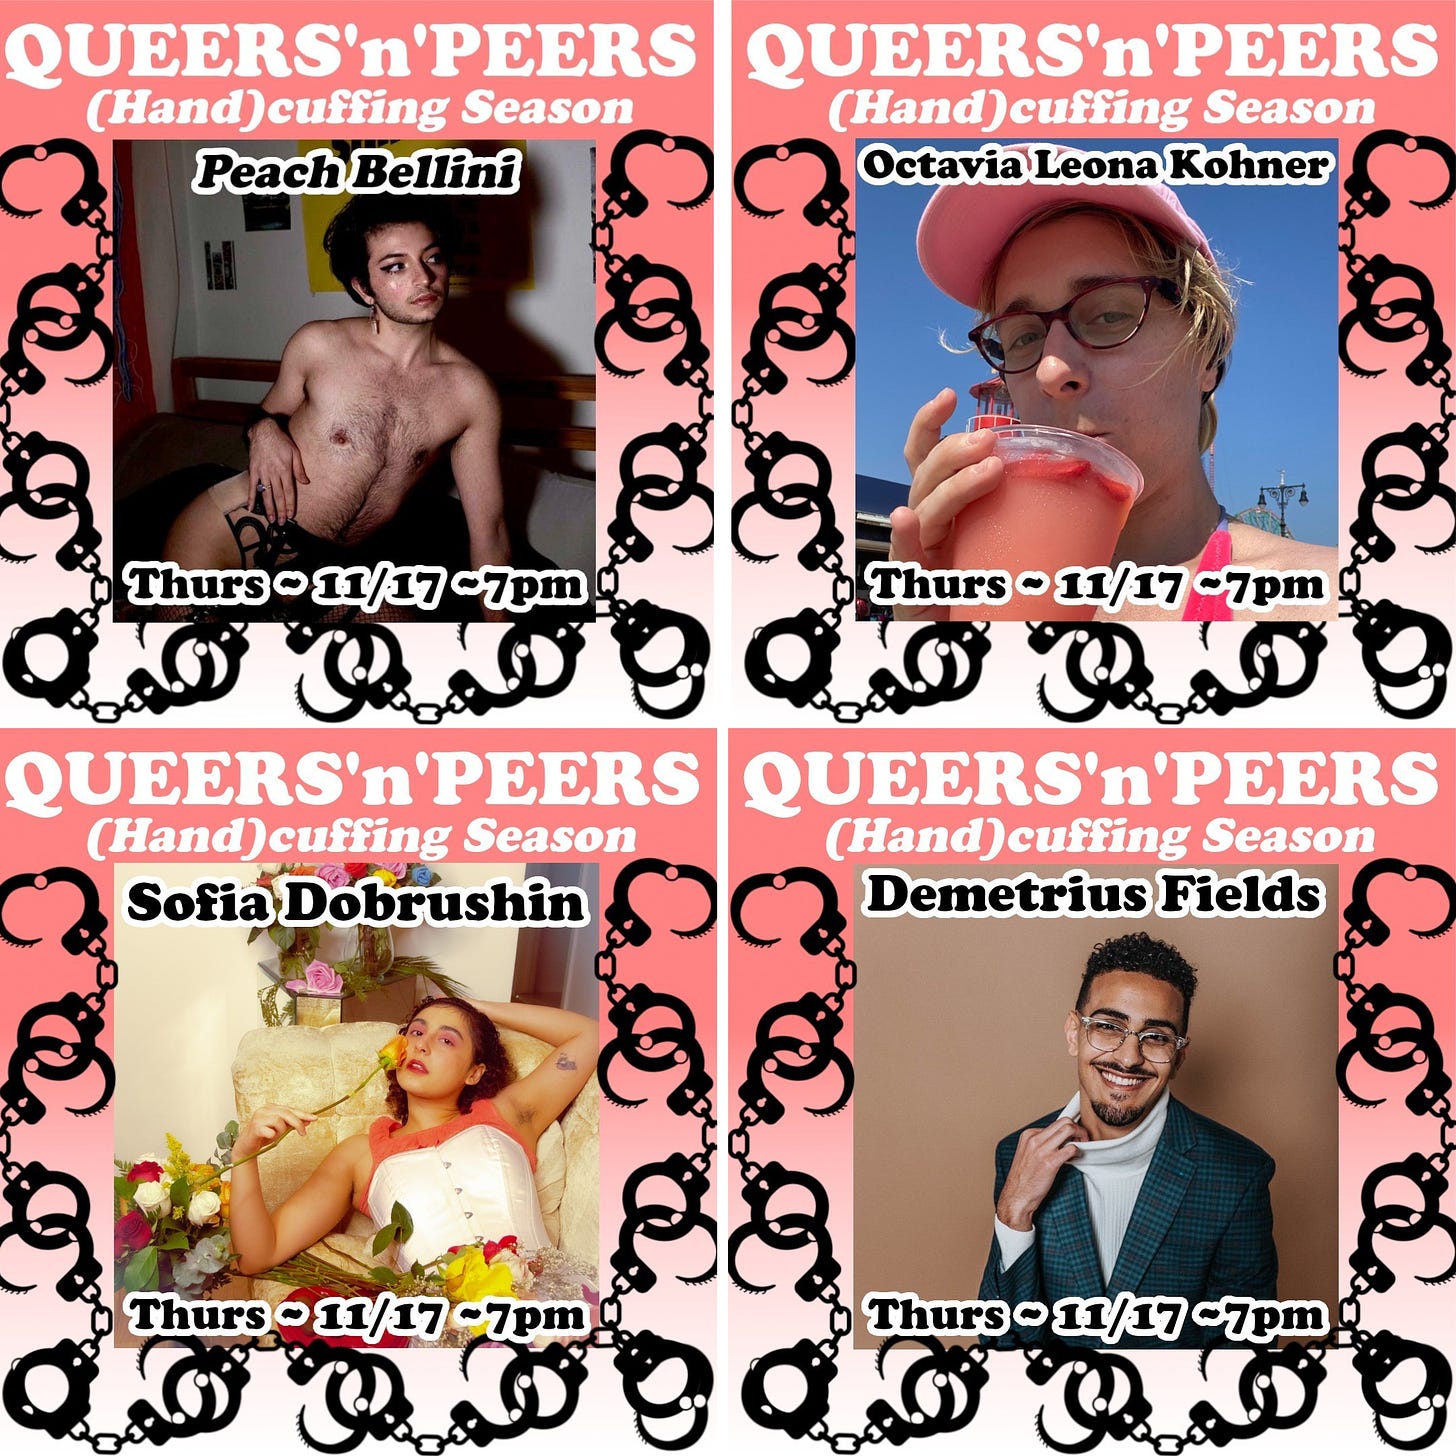 4 graphics advertising Queers N Peers (Hand)Cuffing Season show on Thursday 11/17 7pm, each graphic spotlights a different performer: Peach Bellini, Octavia Leona Kohner, Sofia Dobrushin, and Demetrius Fields